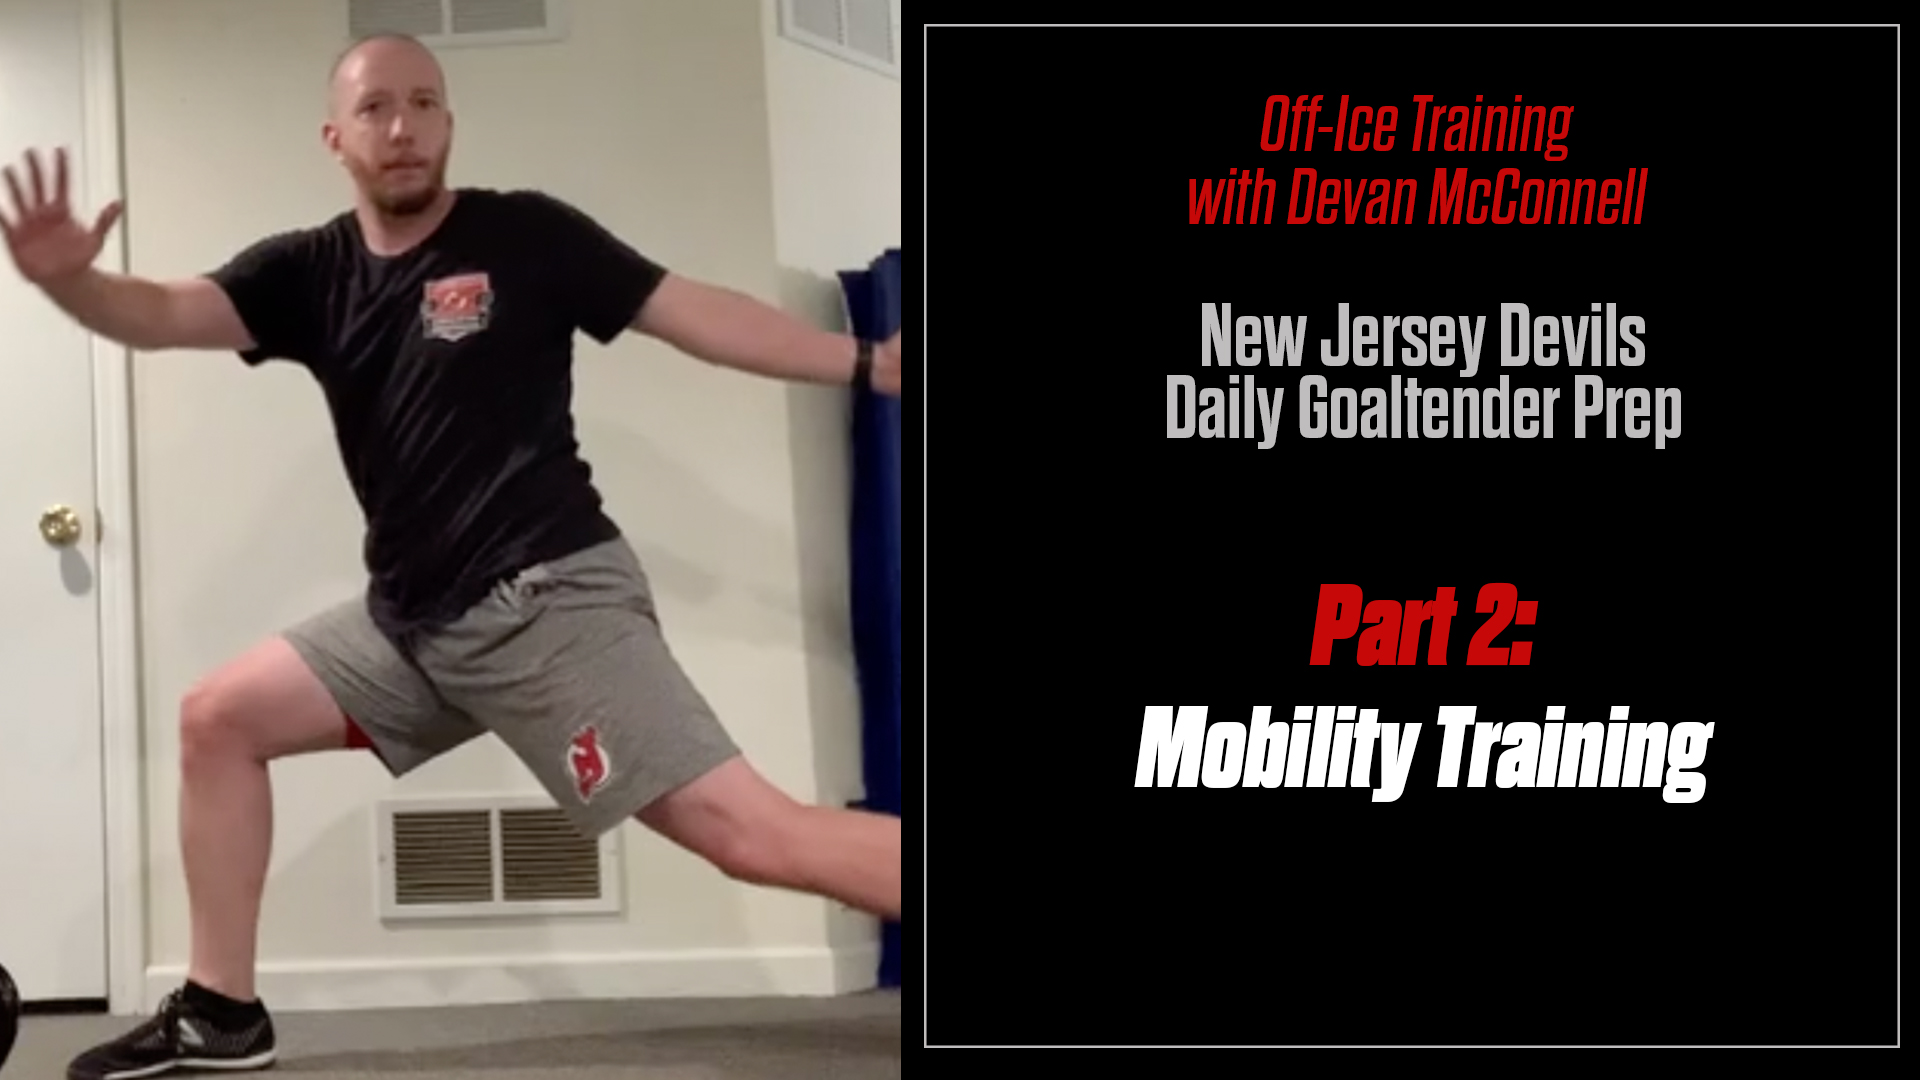 Off-Ice: Devan McConnell: New Jersey Devils Daily Goaltender Prep Part 2 – Mobility